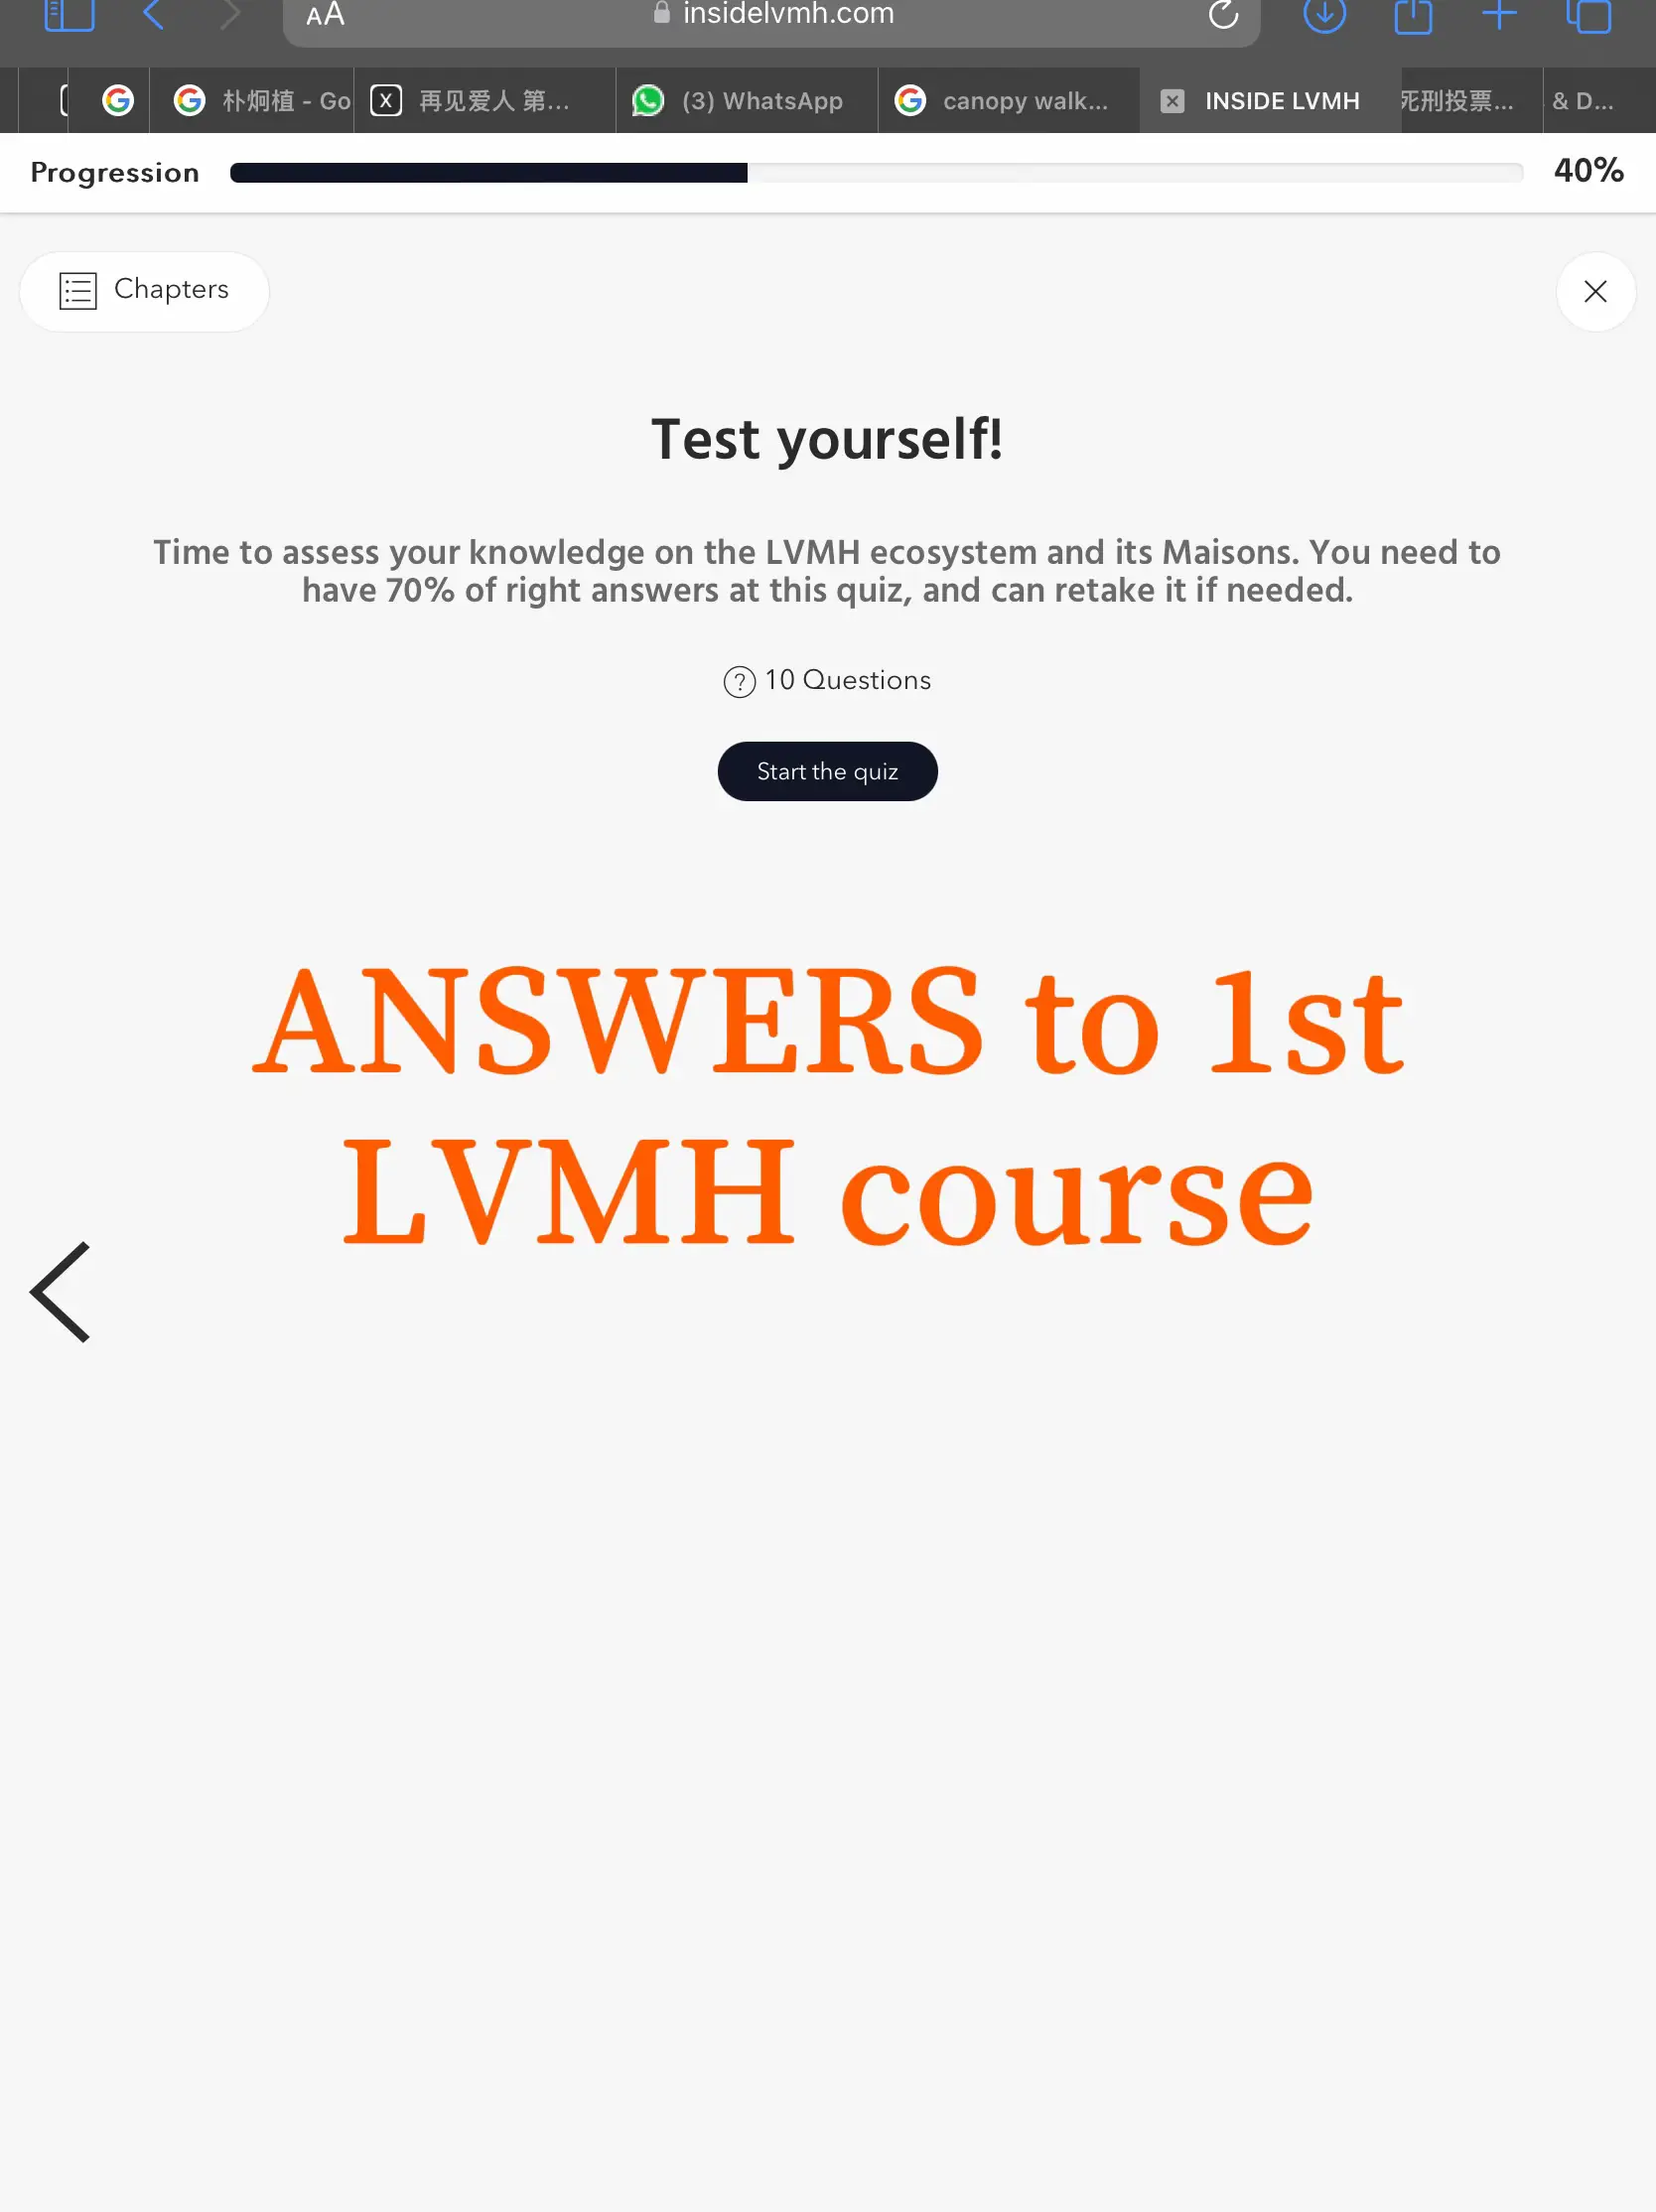 ANSWERS to 1st LVMH course! 💯😎, Gallery posted by kerker 🩷